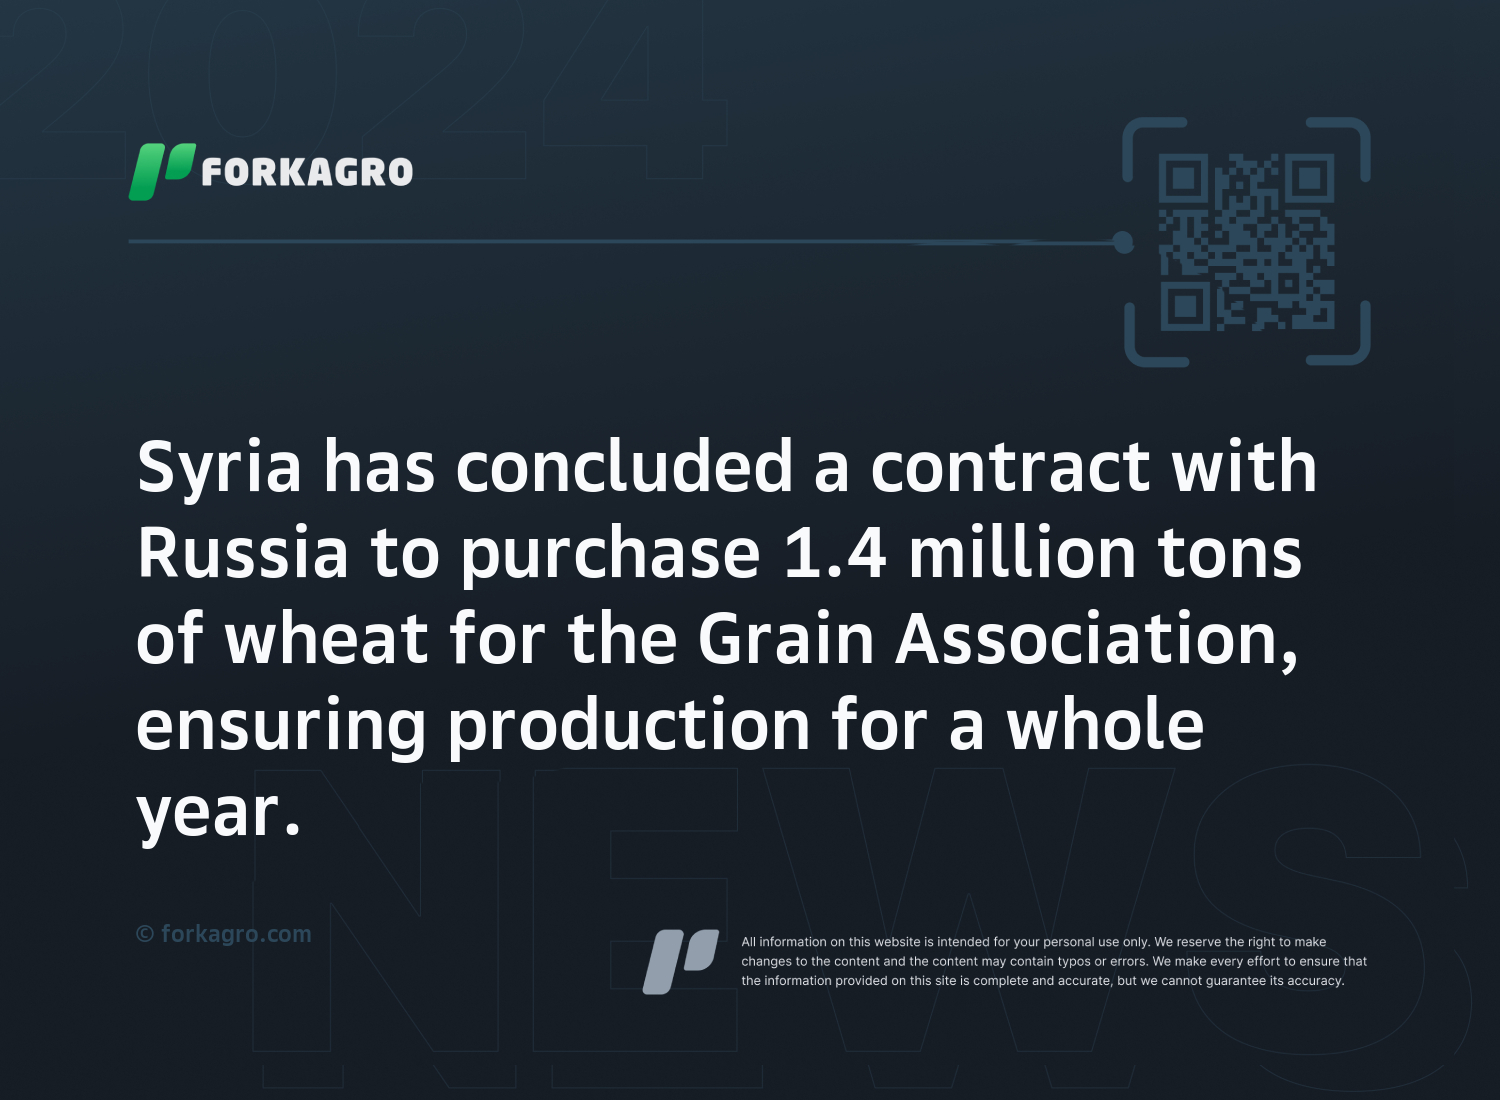 Syria has concluded a contract with Russia to purchase 1.4 million tons of wheat for the Grain Association, ensuring production for a whole year.